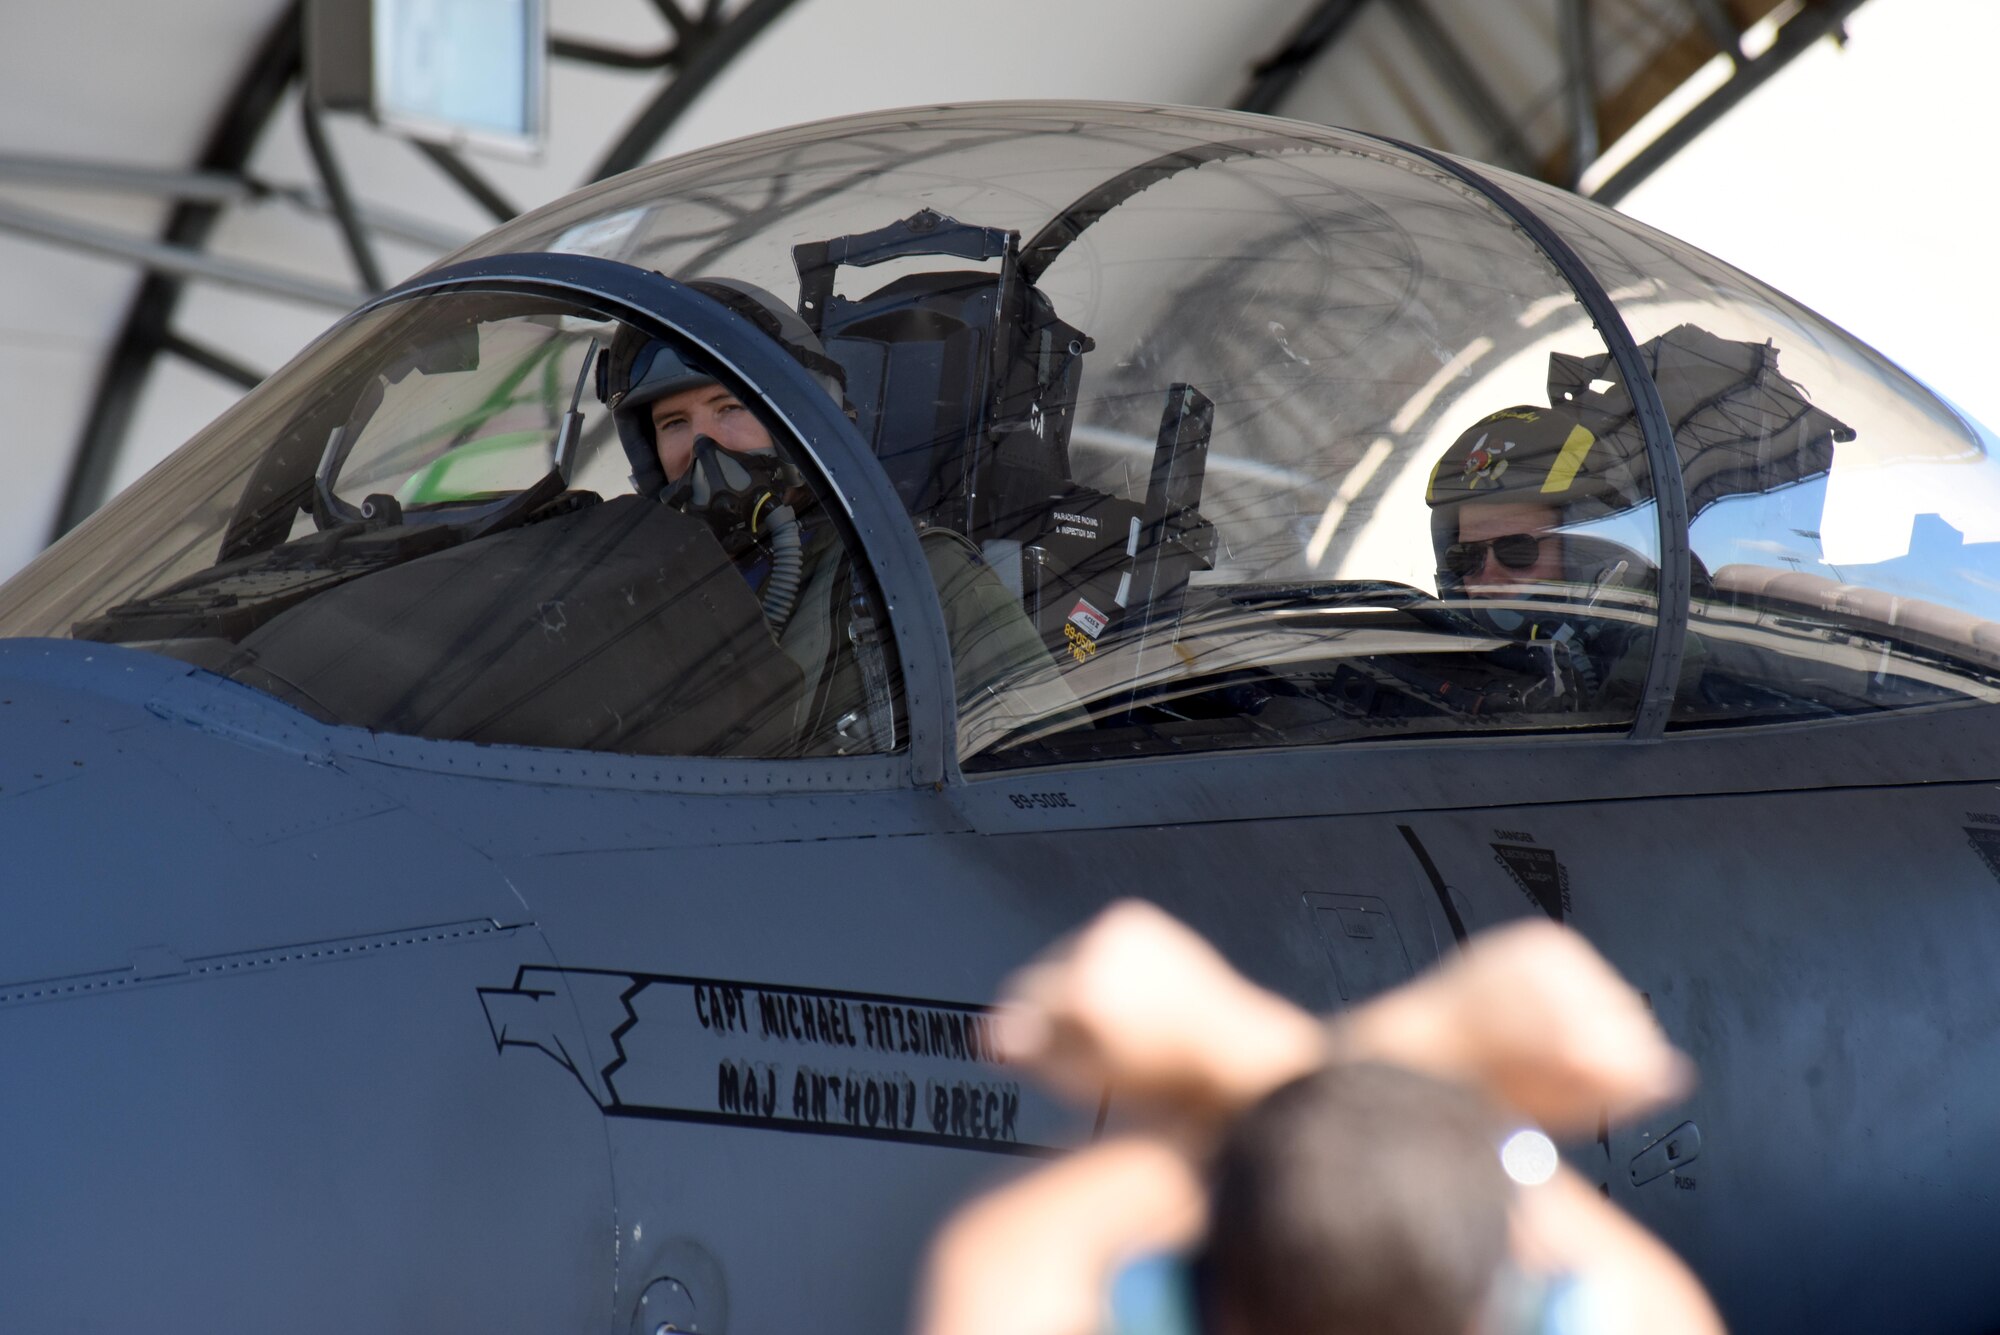 Lt. Col. Eric Schmidt, 334th Fighter Squadron director of operations, prepares to taxi prior to his final F-15E Strike Eagle flight June 17, 2016, at Seymour Johnson Air Force Base, North Carolina. Schmidt and Maj. Timothy Foery, 334th FS weapon systems officer, flew together for the final time, as Schmidt eclipsed 3,000 hours in the Strike Eagle. (U.S. Air Force photo/Tech. Sgt. Chuck Broadway)